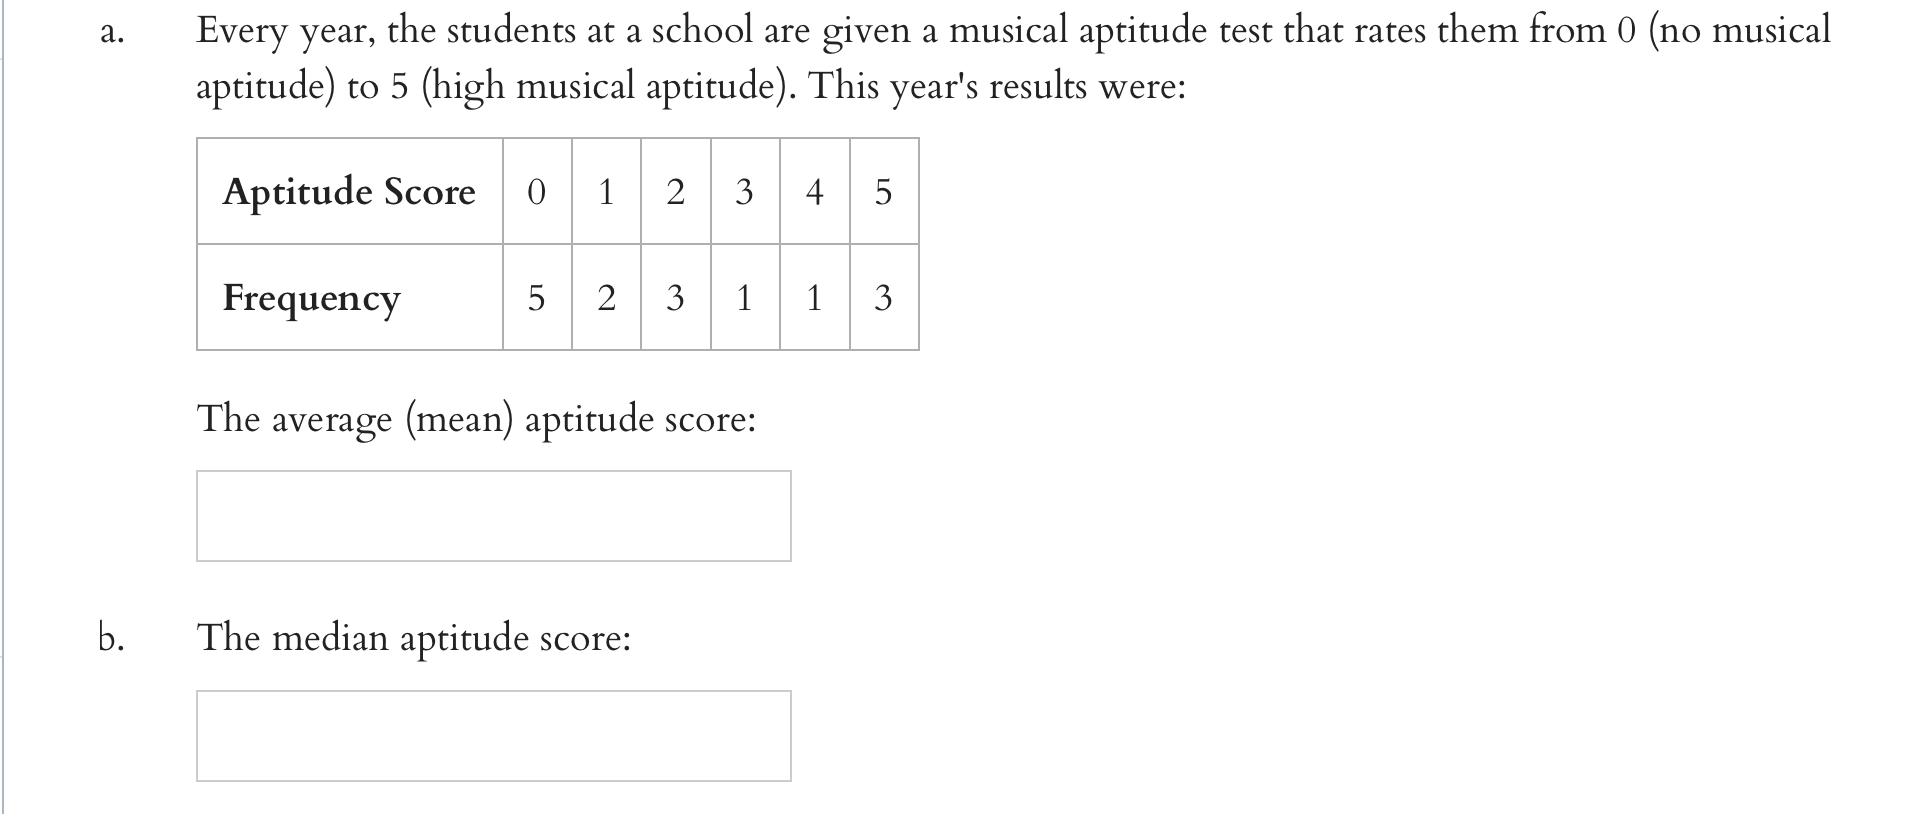 a-every-year-the-students-at-a-school-are-given-a-musical-aptitude-test-that-rates-them-from-0